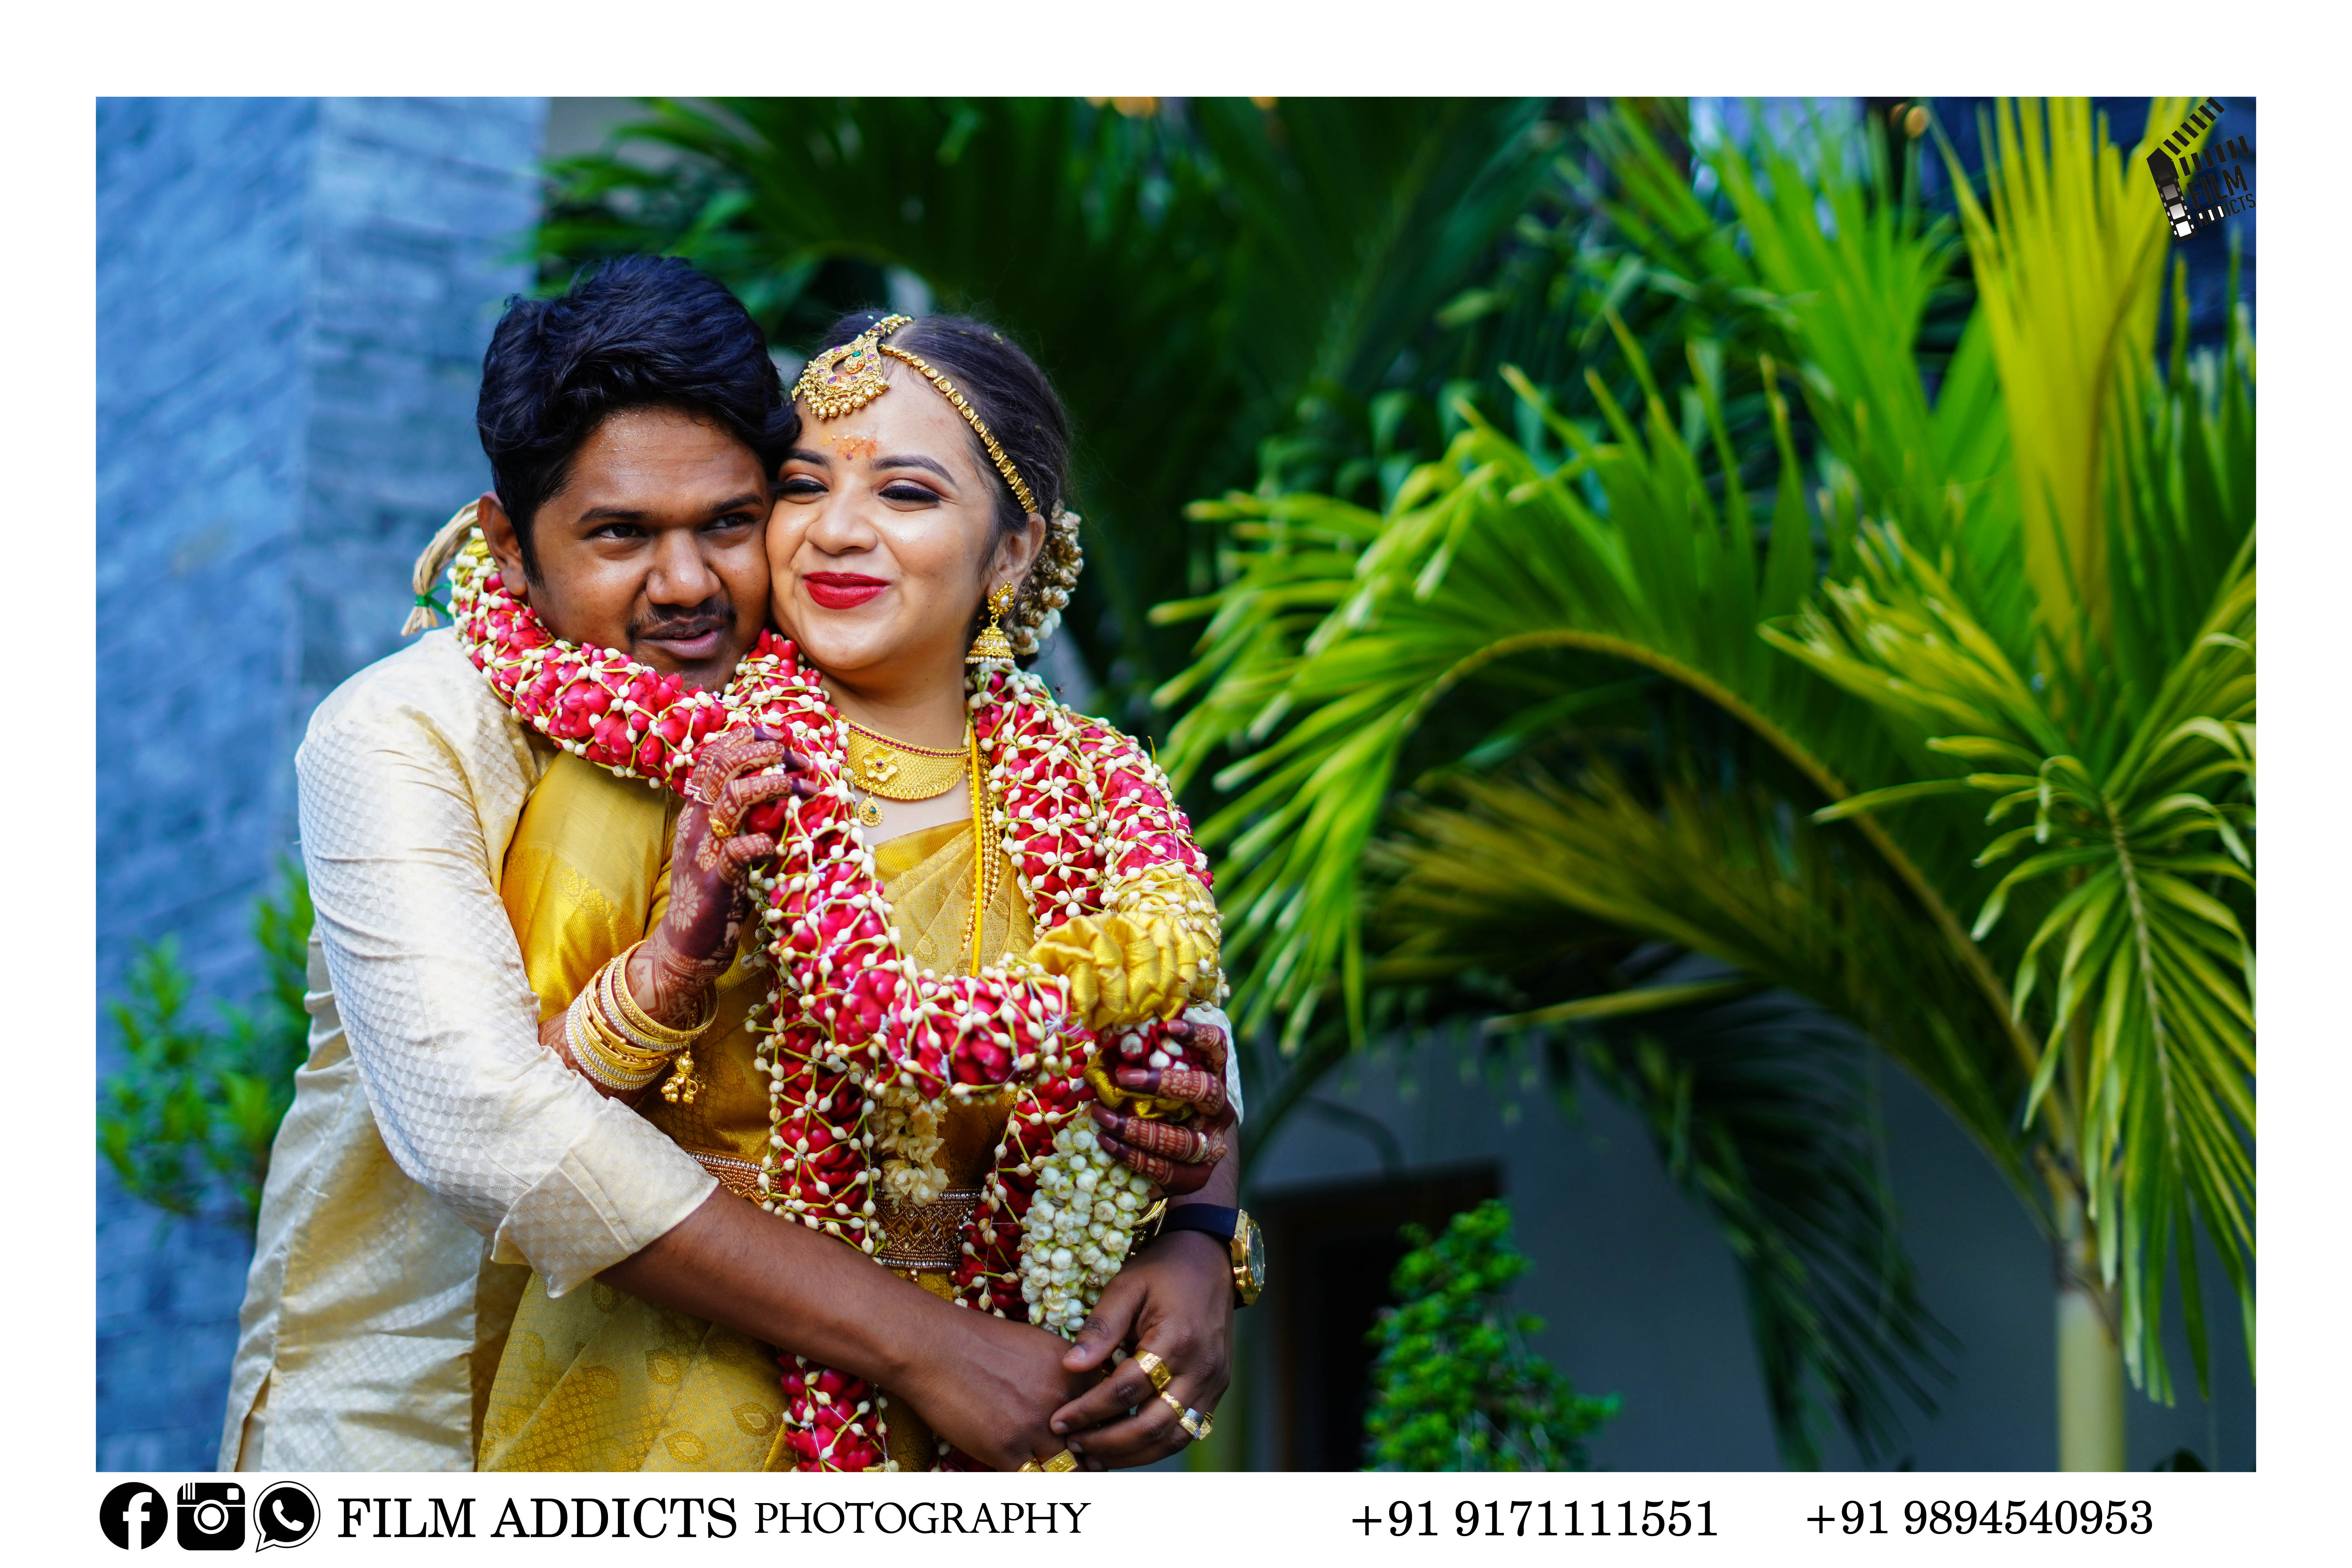 Best Wedding Planners in Theni-FilmAddicts Photography,Best Chettiar Wedding Photographers in Theni,Best Chettiar Wedding Photography in Theni,Best candid Photographers in Theni,Best candid Photography in Theni,Best marriage Photographers in Theni,Best marriage Photography in Theni,Best Photographers in Theni,Best Photography in Theni,Best Chettiar Wedding candid Photography in Theni,Best Chettiar Wedding candid Photographers in Theni,Best Chettiar Wedding video in Theni,Best Chettiar Wedding videographers in Theni,Best Chettiar Wedding videography in Theni,Best candid videographers in Theni,Best candid videography in Theni,Best marriage videographers in Theni,Best marriage videography in Theni,Best videographers in Theni,Best videography in Theni,Best Chettiar Wedding candid videography in Theni,Best Chettiar Wedding candid videographers in Theni,Best helicam operators in Theni,Best drone operators in Theni,Best Chettiar Wedding studio in Theni,Best professional Photographers in Theni,Best professional Photography in Theni,No.1 Chettiar Wedding Photographers in Theni,No.1 Chettiar Wedding Photography in Theni,Theni Chettiar Wedding Photographers,Theni Chettiar Wedding Photography,Theni Chettiar Wedding videos,Best candid videos in Theni,Best candid photos in Theni,Best helicam operators Photography in Theni,Best helicam operator Photographers in Theni,Best outdoor videography in Theni,Best professional Chettiar Wedding Photography in Theni,Best outdoor Photography in Theni,Best outdoor Photographers in Theni,Best drone operators Photographers in Theni,Best Chettiar Wedding candid videography in Theni,tamilnadu Chettiar Wedding Photography, tamilnadu.